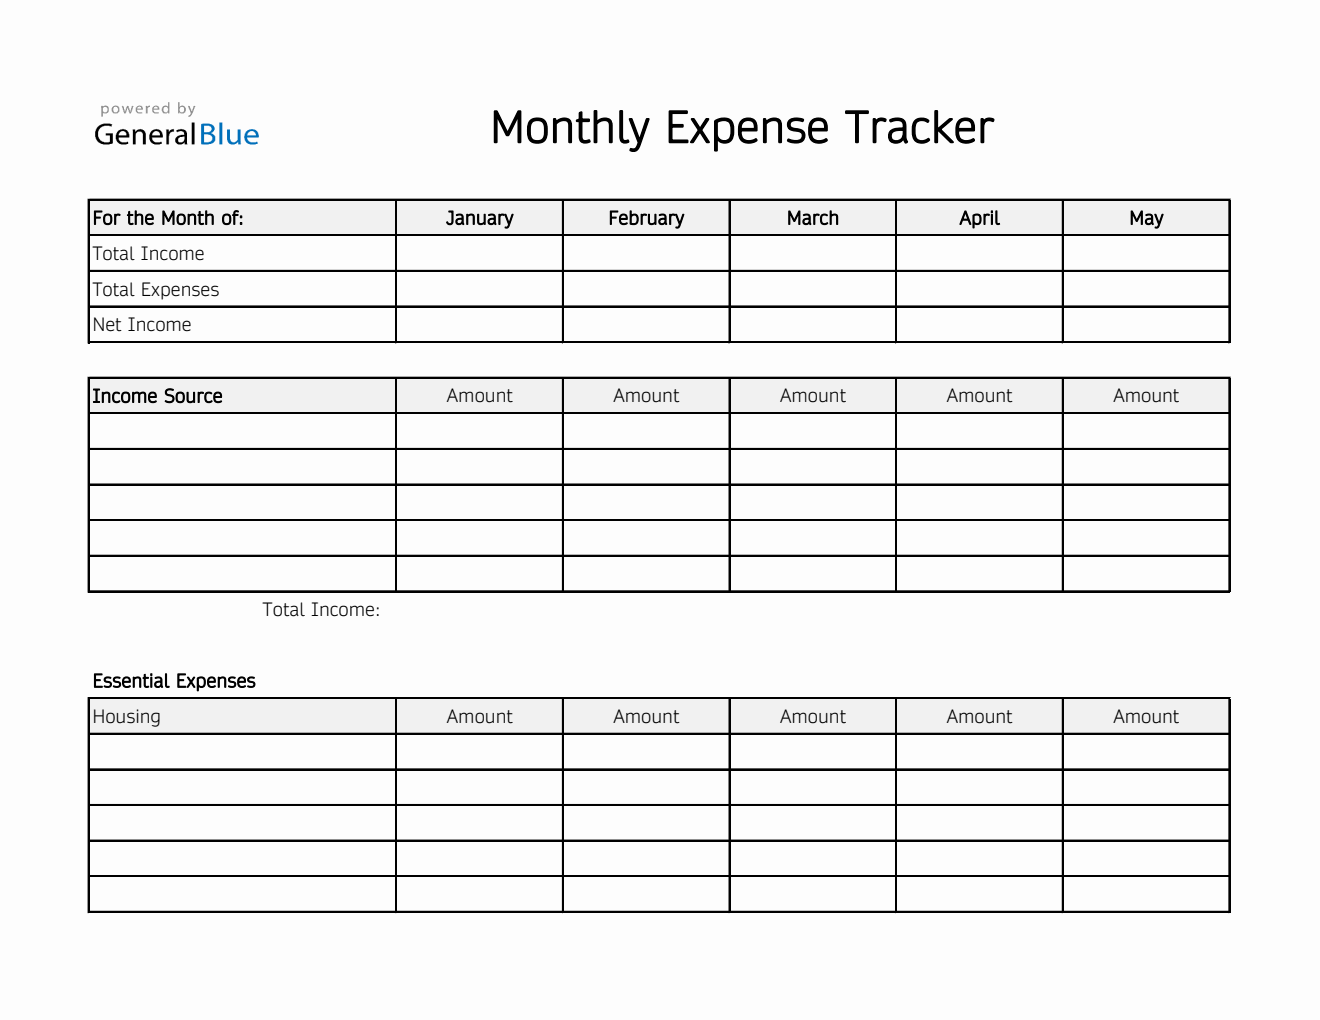 Monthly Expense Tracker in Excel (Simple)